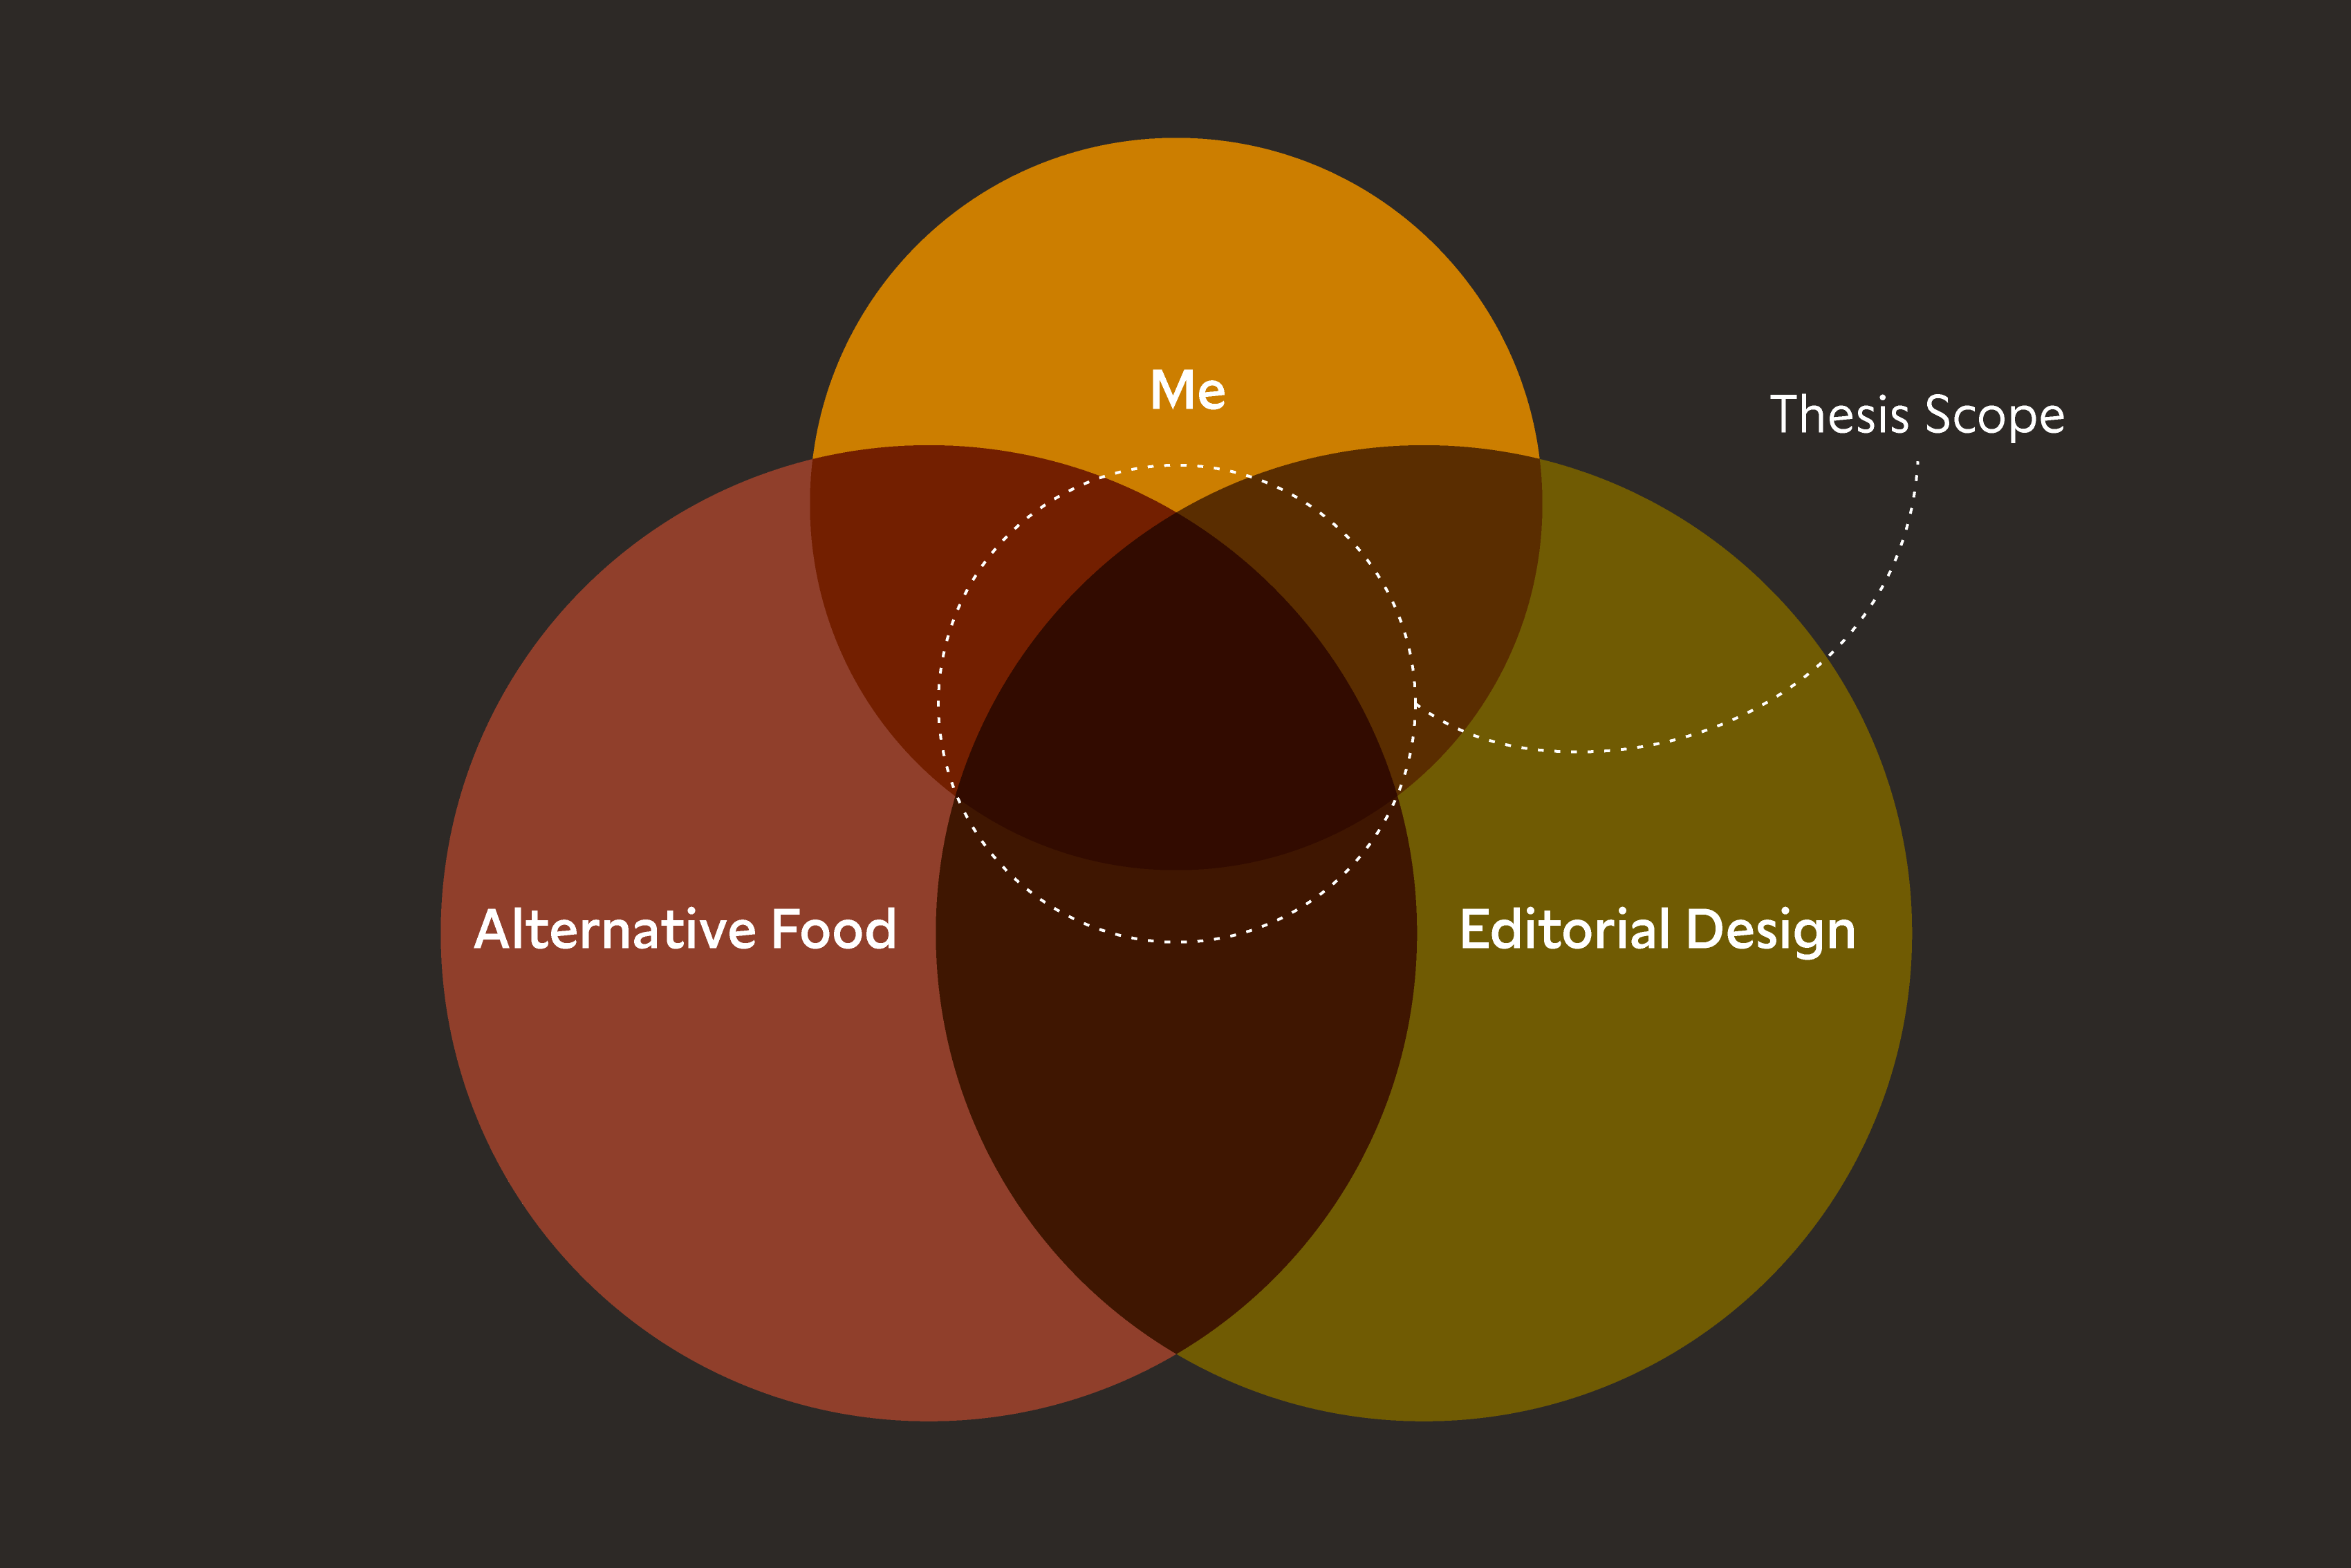 Diagram showing the three main areas of the research: Me, alternative food, and editorial design. 